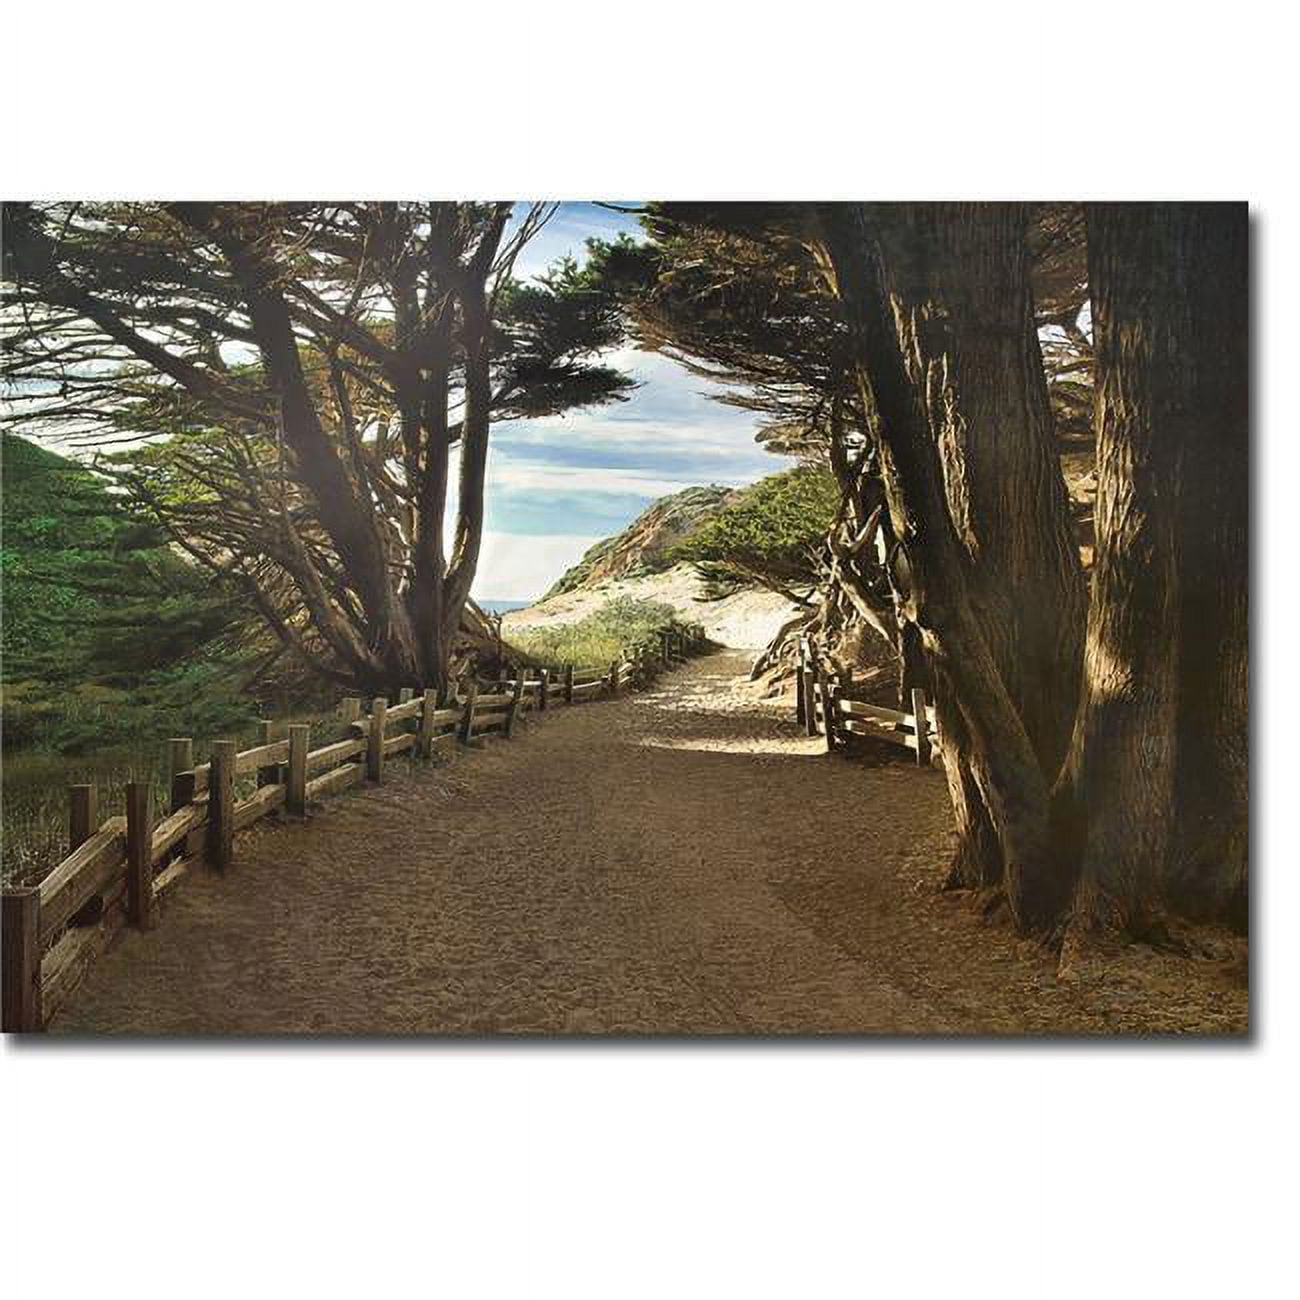 1624b384cg Big Sur By Michael Cahill Premium Gallery-wrapped Canvas Giclee Art - 16 X 24 X 1.5 In.